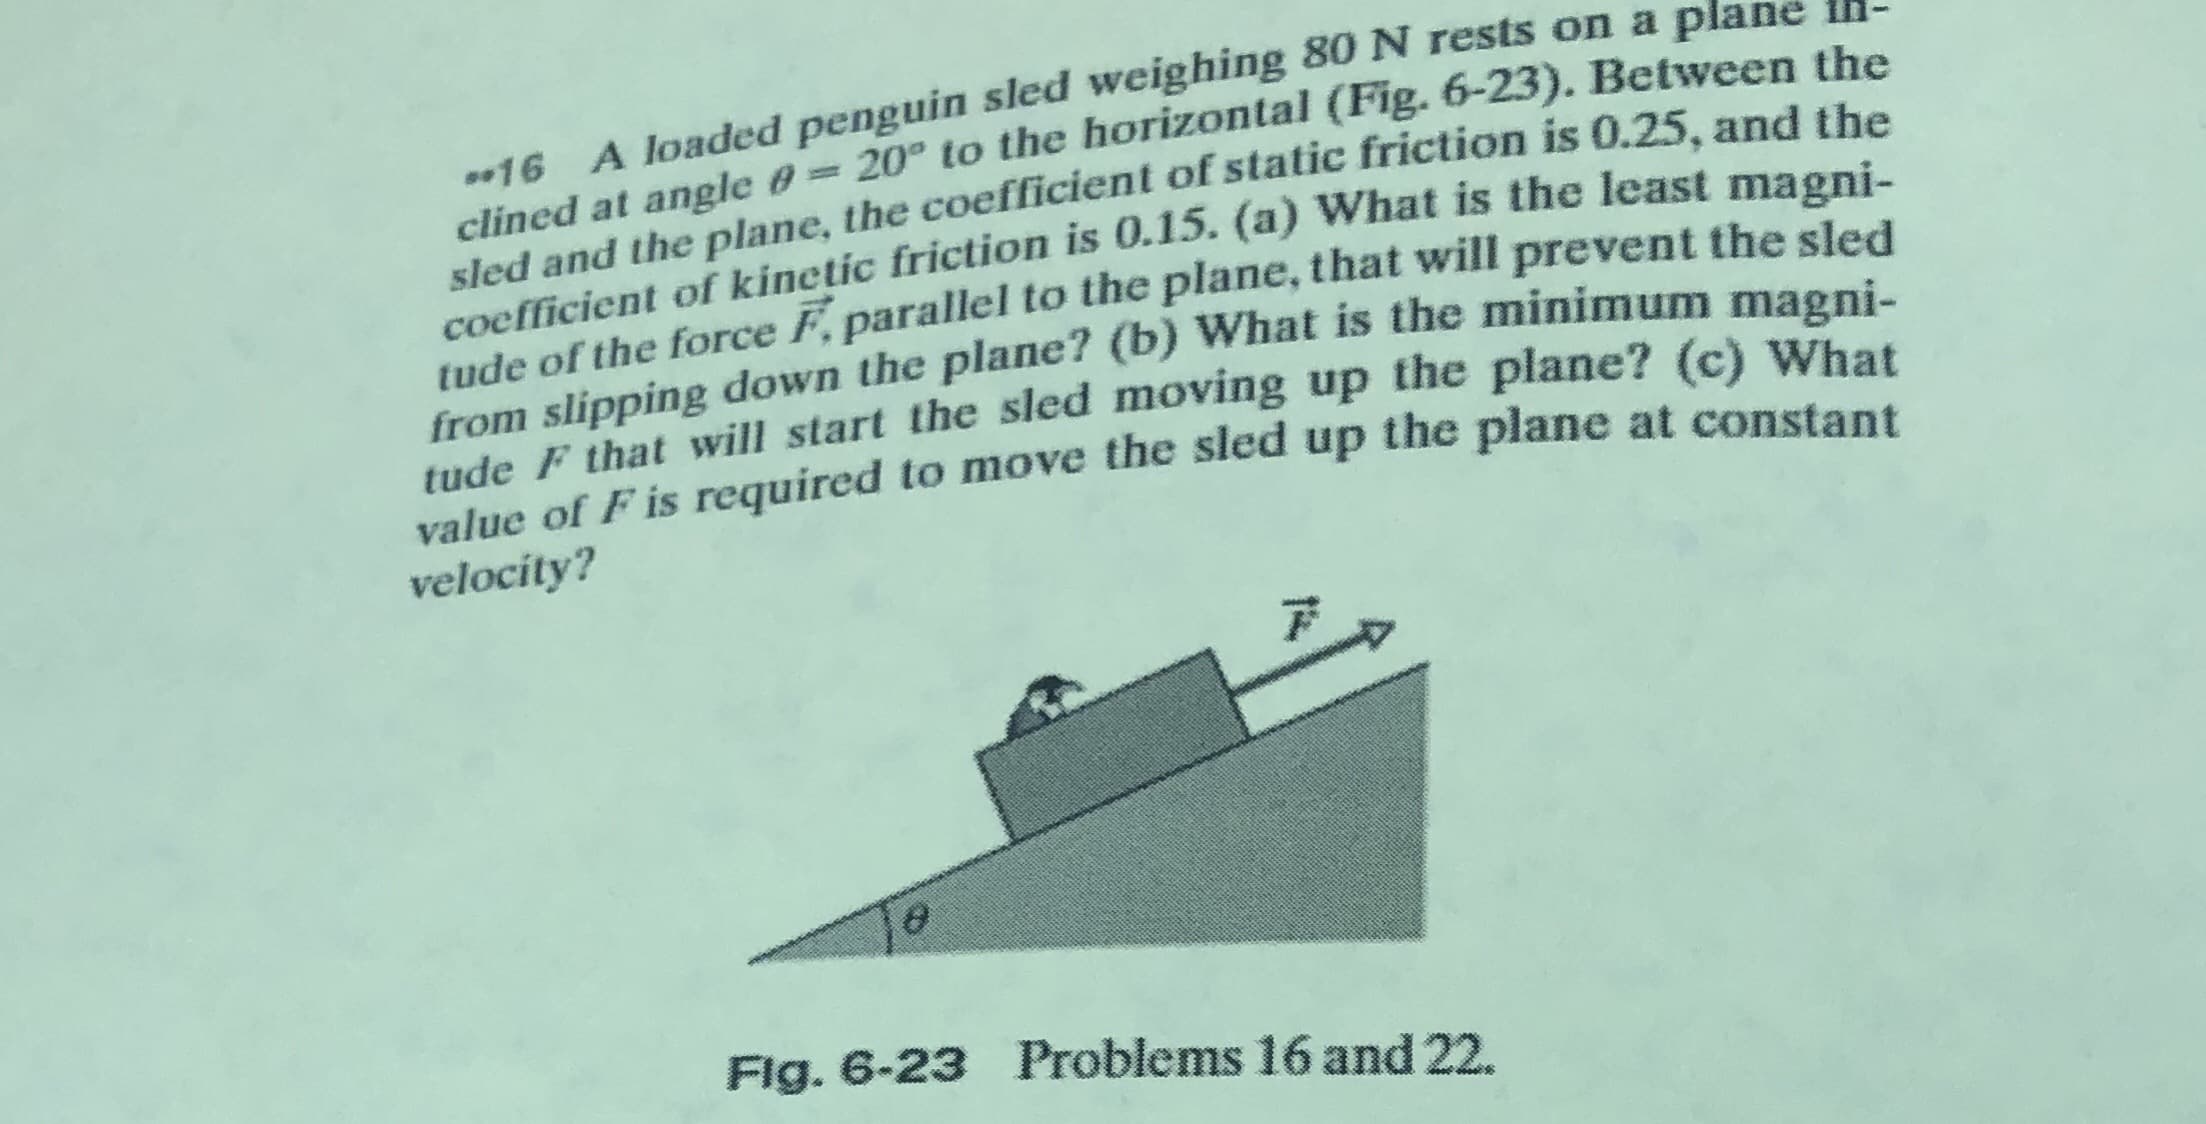 16 A loaded penguin sled weighing 80 N rests on a plane -
clined at angle 0=20° to the horizontal (Fig. 6-23). Between tbe
sled and the plane, the coefficient of static friction is 0.25. and th
coefficient of kinetic friction is 0.15. (a) What is the least mag
tude of the force F, parallel to the plane, that will prevent the sled
from slipping down the plane? (b) What is the minimum magni.
tude F that will start the sled moving up the plane? (c) What
value of F is required to move the sled up the plane at constant
%3D
velocity?
Fig. 6-23 Problems 16 and 22.
